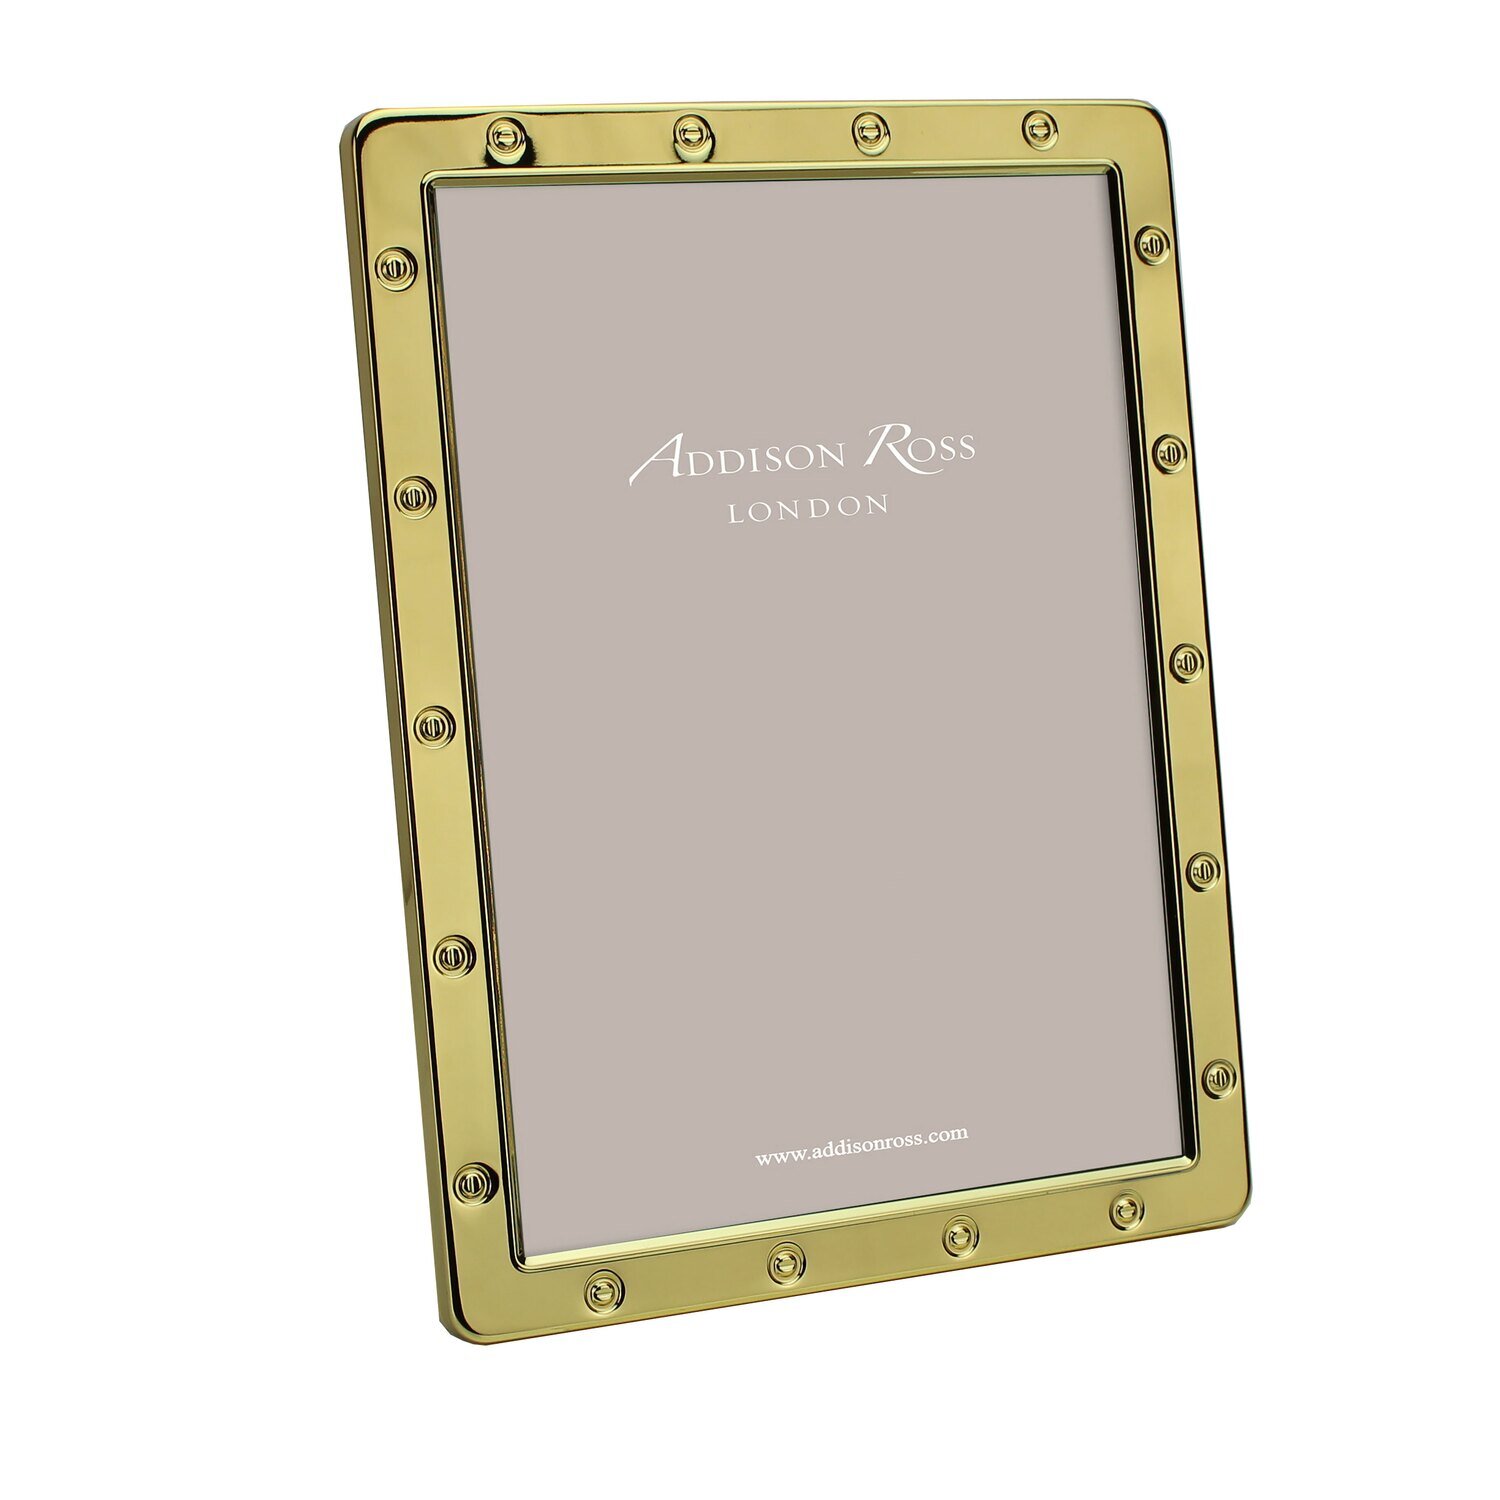 Addison Ross 5 x 7 Inch Locket in Gold Picture Frame Gold FR2731